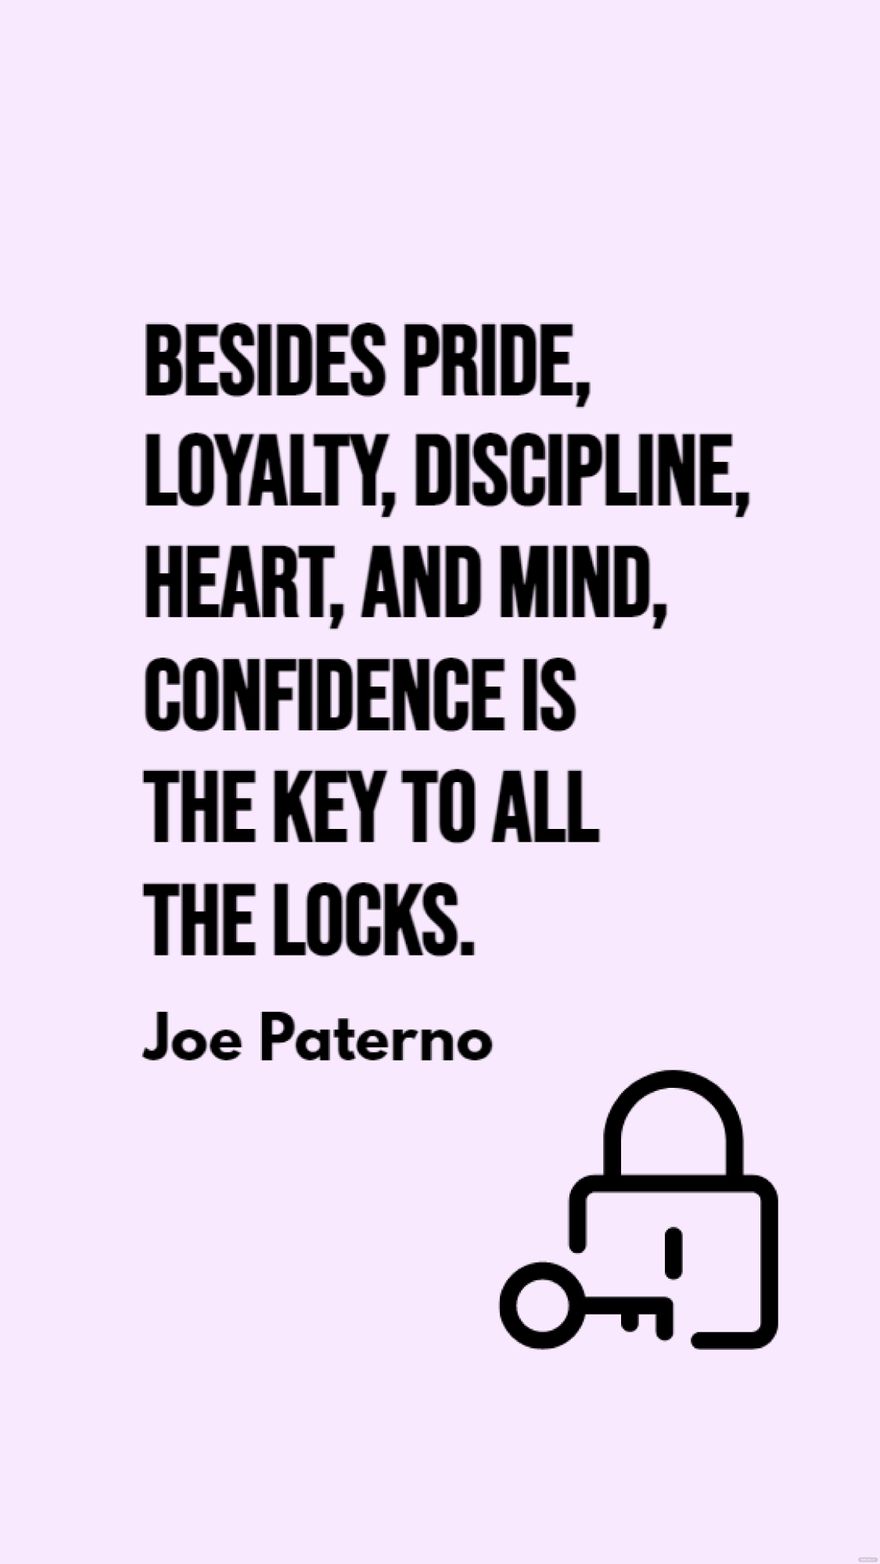 Joe Paterno - Besides pride, loyalty, discipline, heart, and mind, confidence is the key to all the locks.